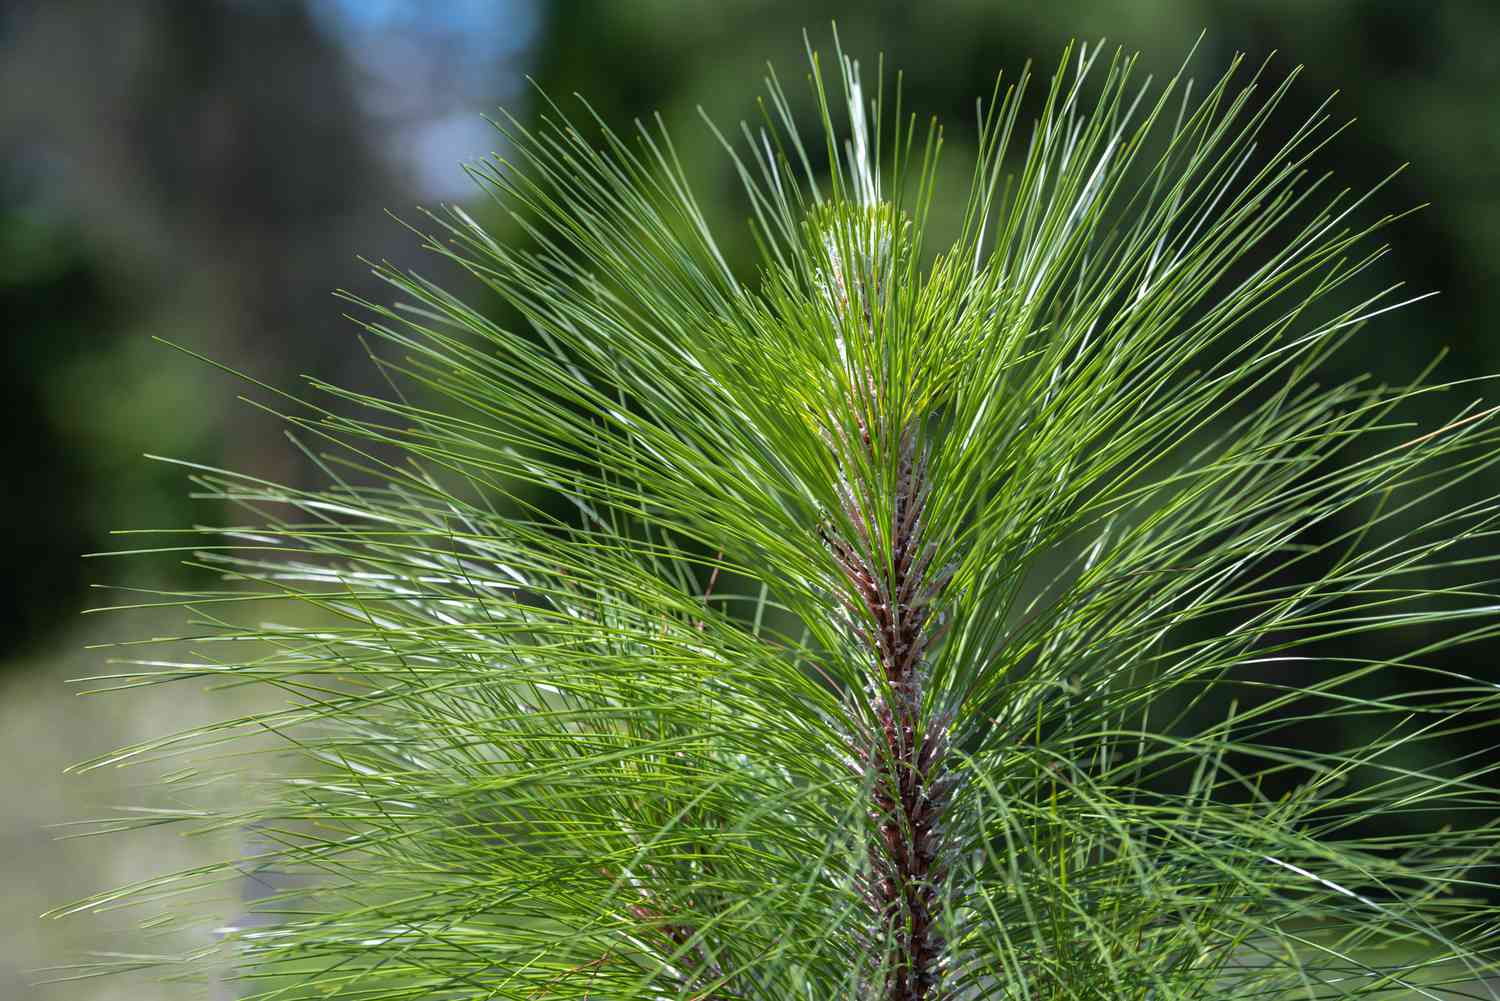 Longleaf pine tree top with new growth and long needles closeup